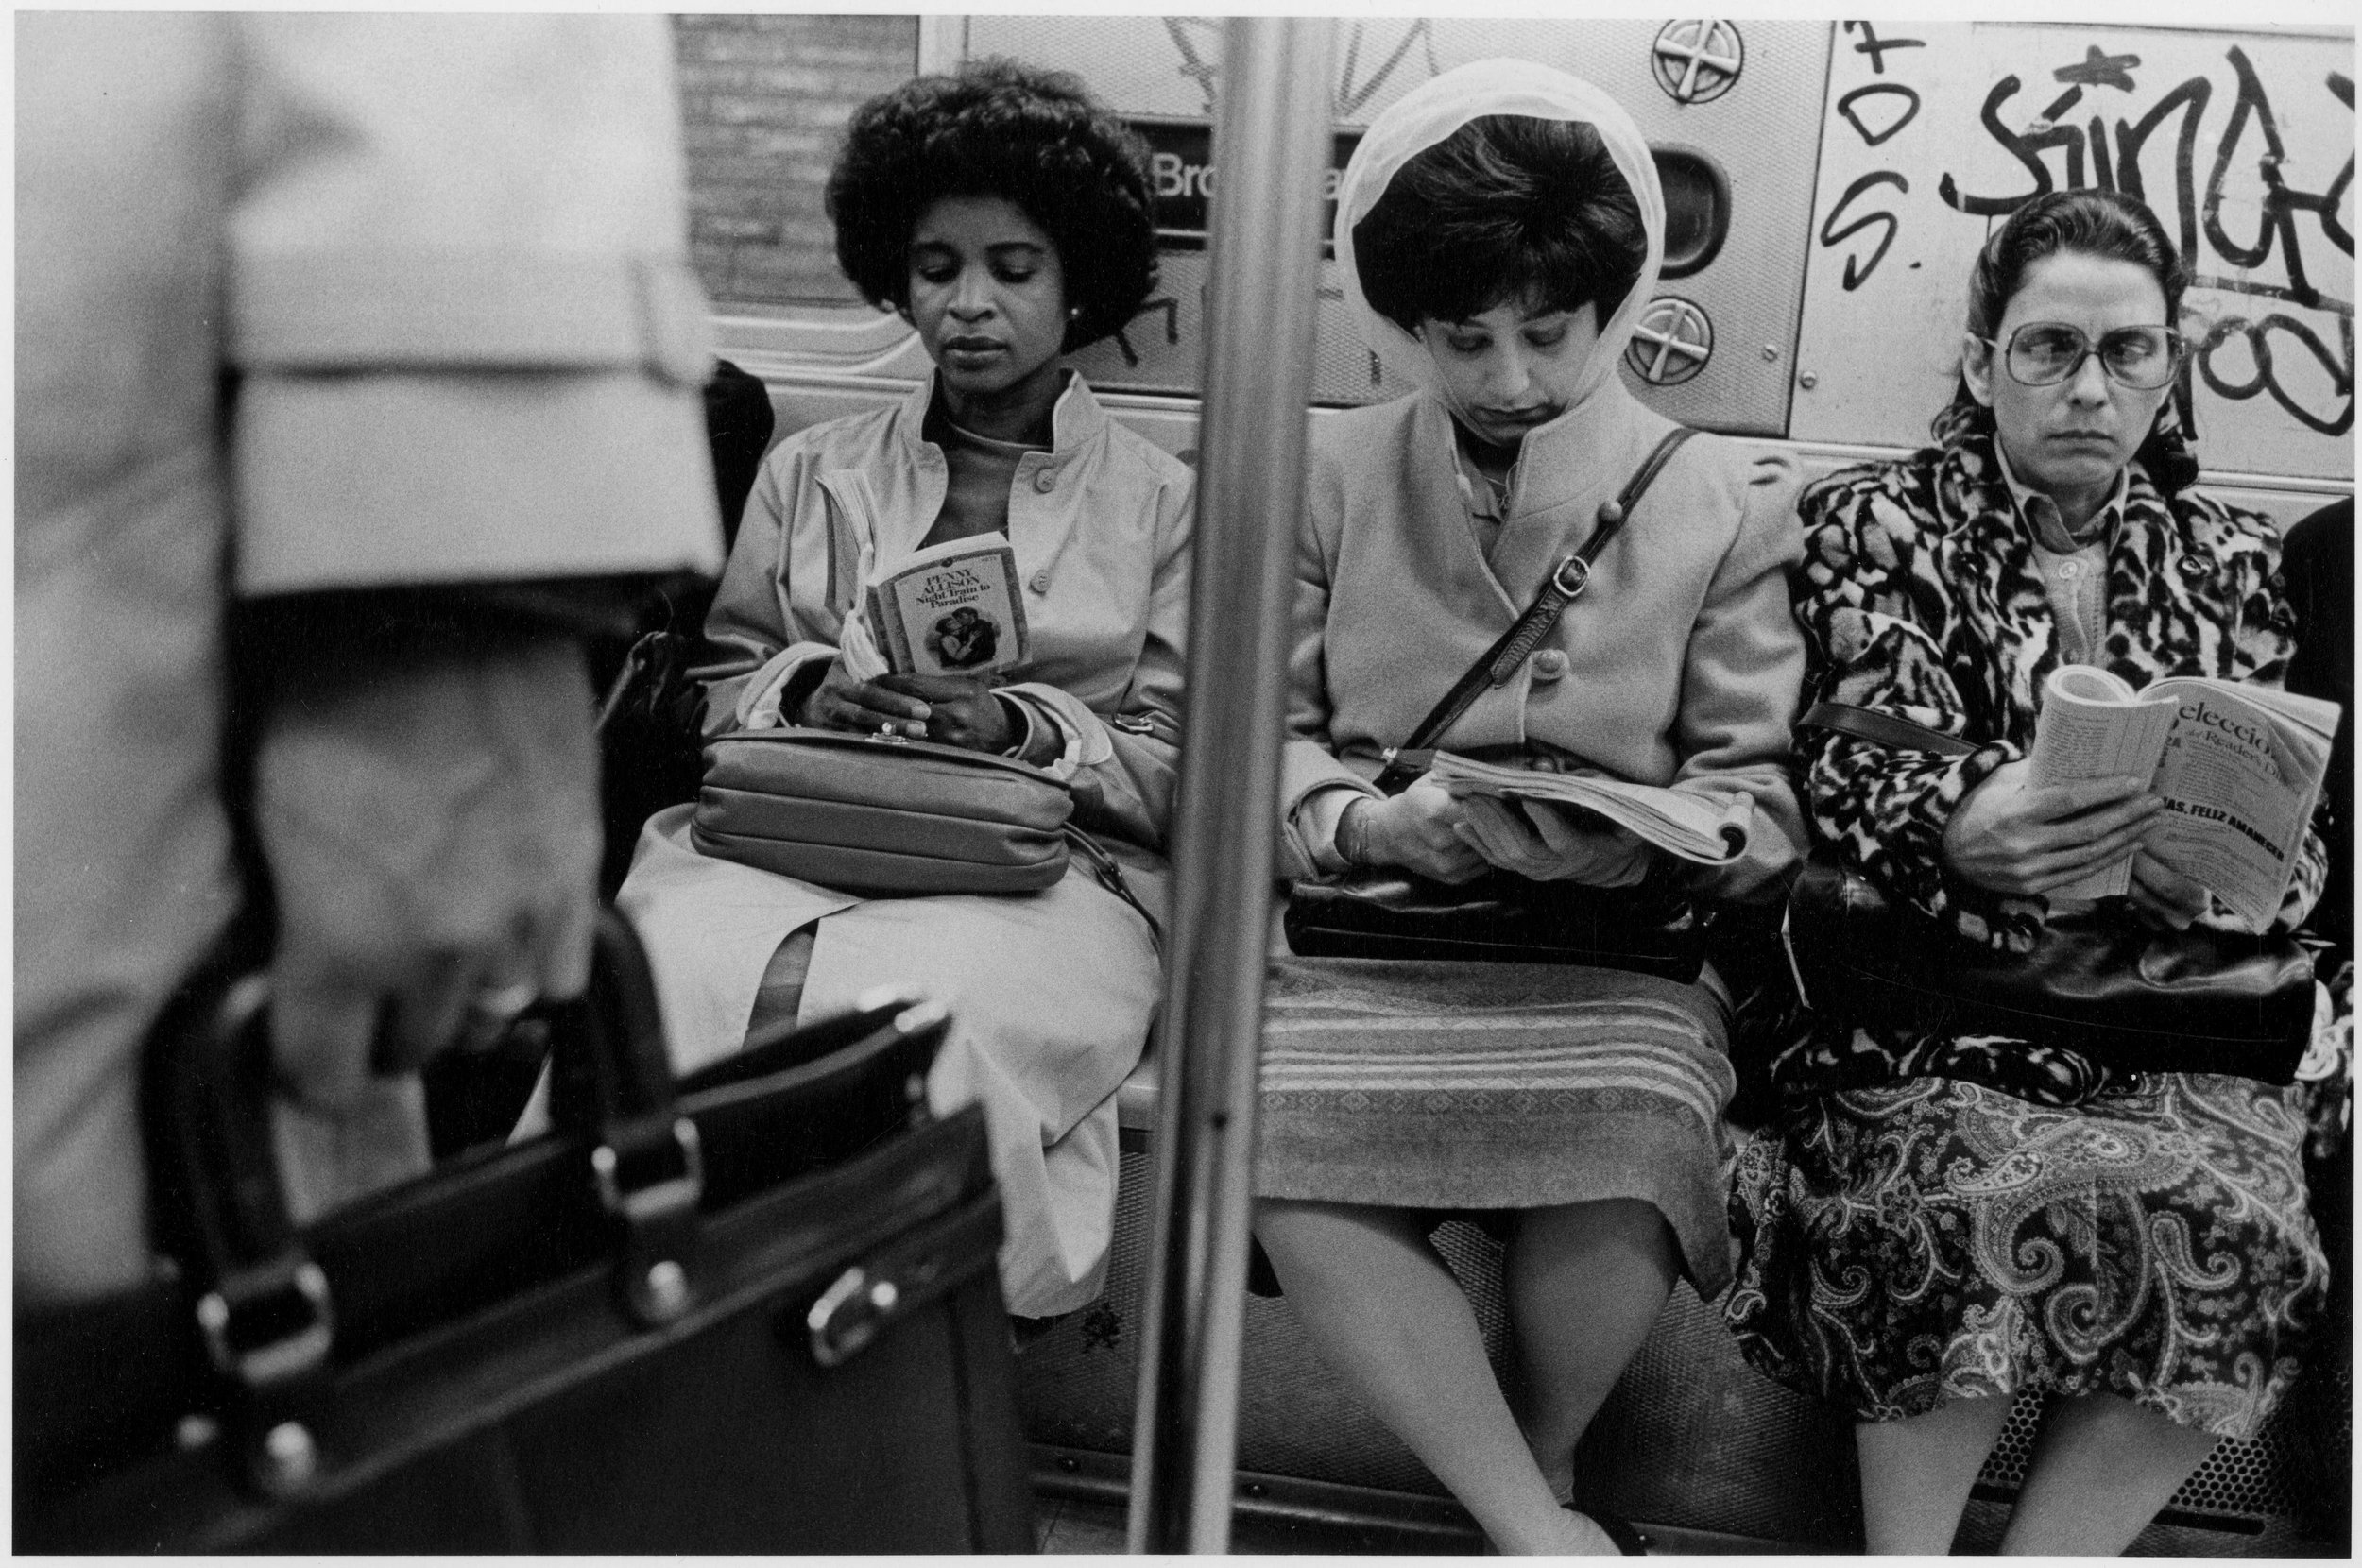 3 women read books on subway, nyc, early 1980’s